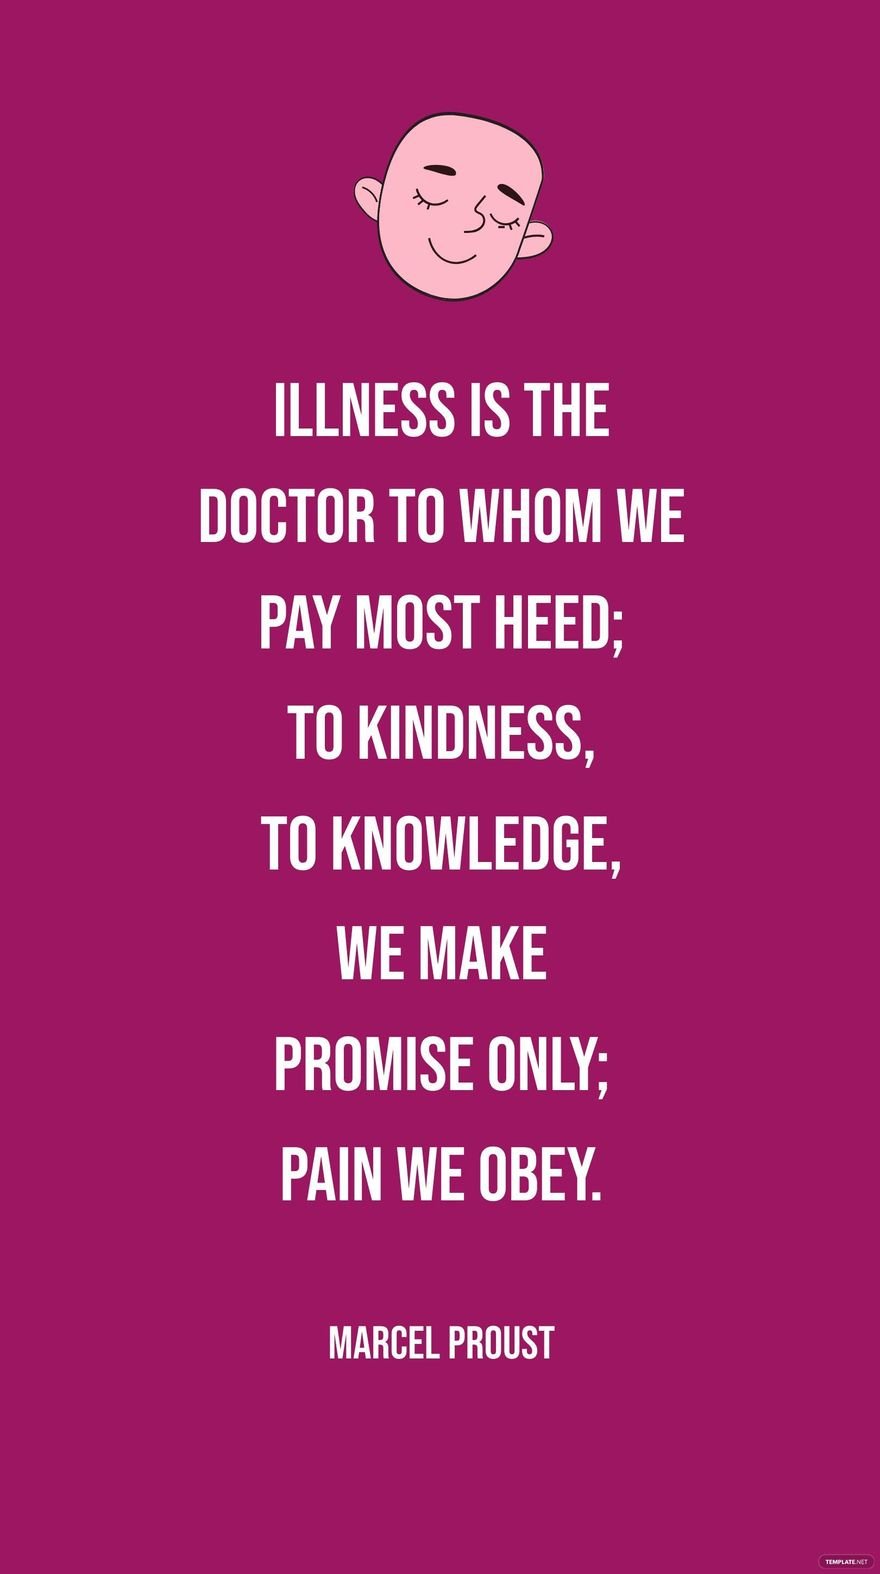 Free Marcel Proust - Illness is the doctor to whom we pay most heed; to kindness, to knowledge, we make promise only; pain we obey. in JPG